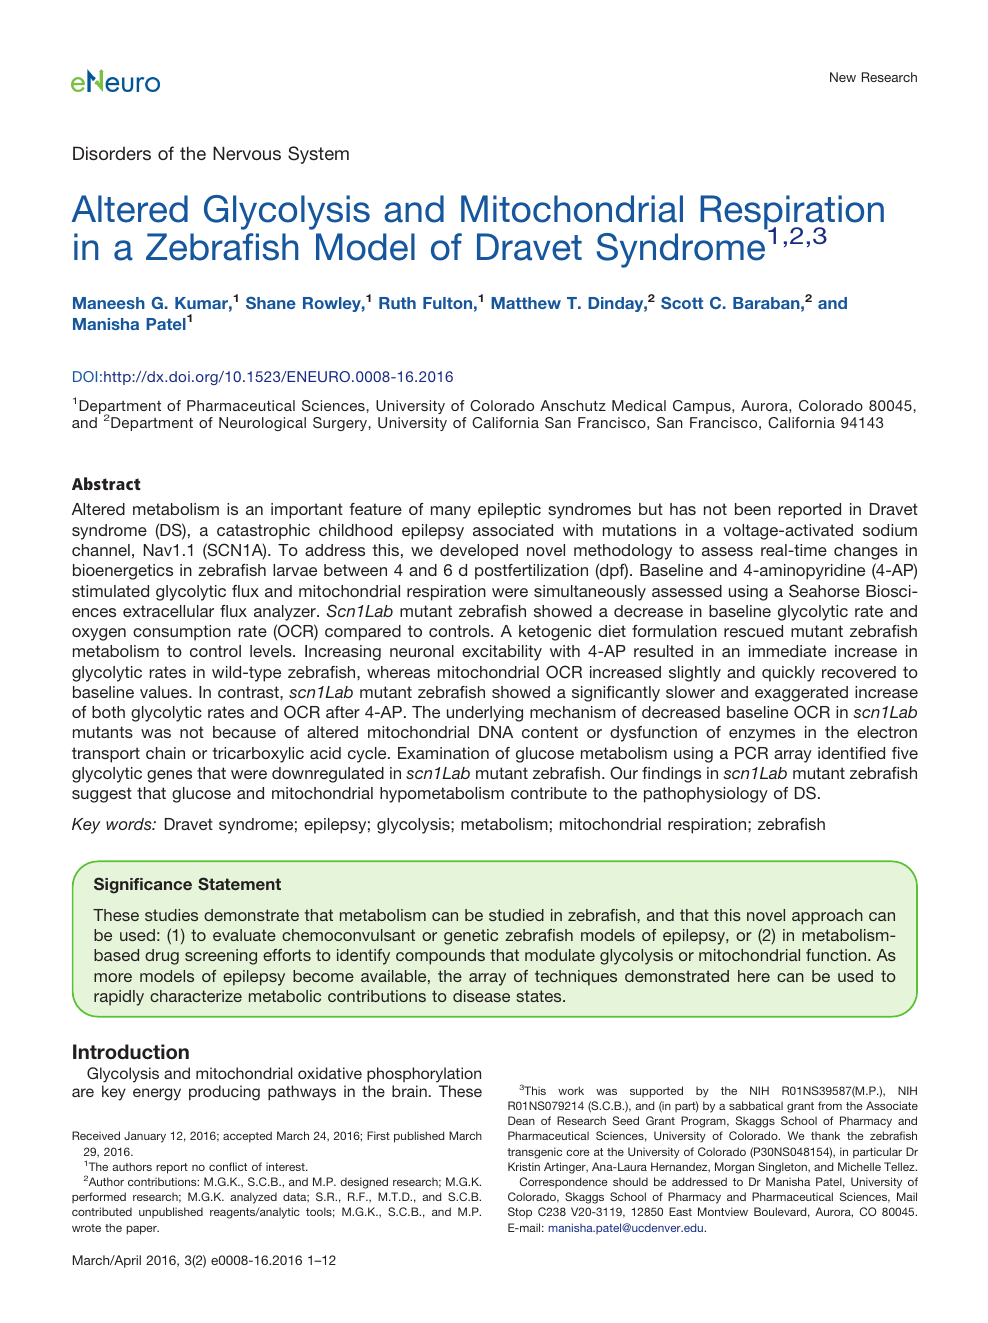 Altered Glycolysis And Mitochondrial Respiration In A Zebrafish Model Of Dravet Syndrome Topic Of Research Paper In Biological Sciences Download Scholarly Article Pdf And Read For Free On Cyberleninka Open Science